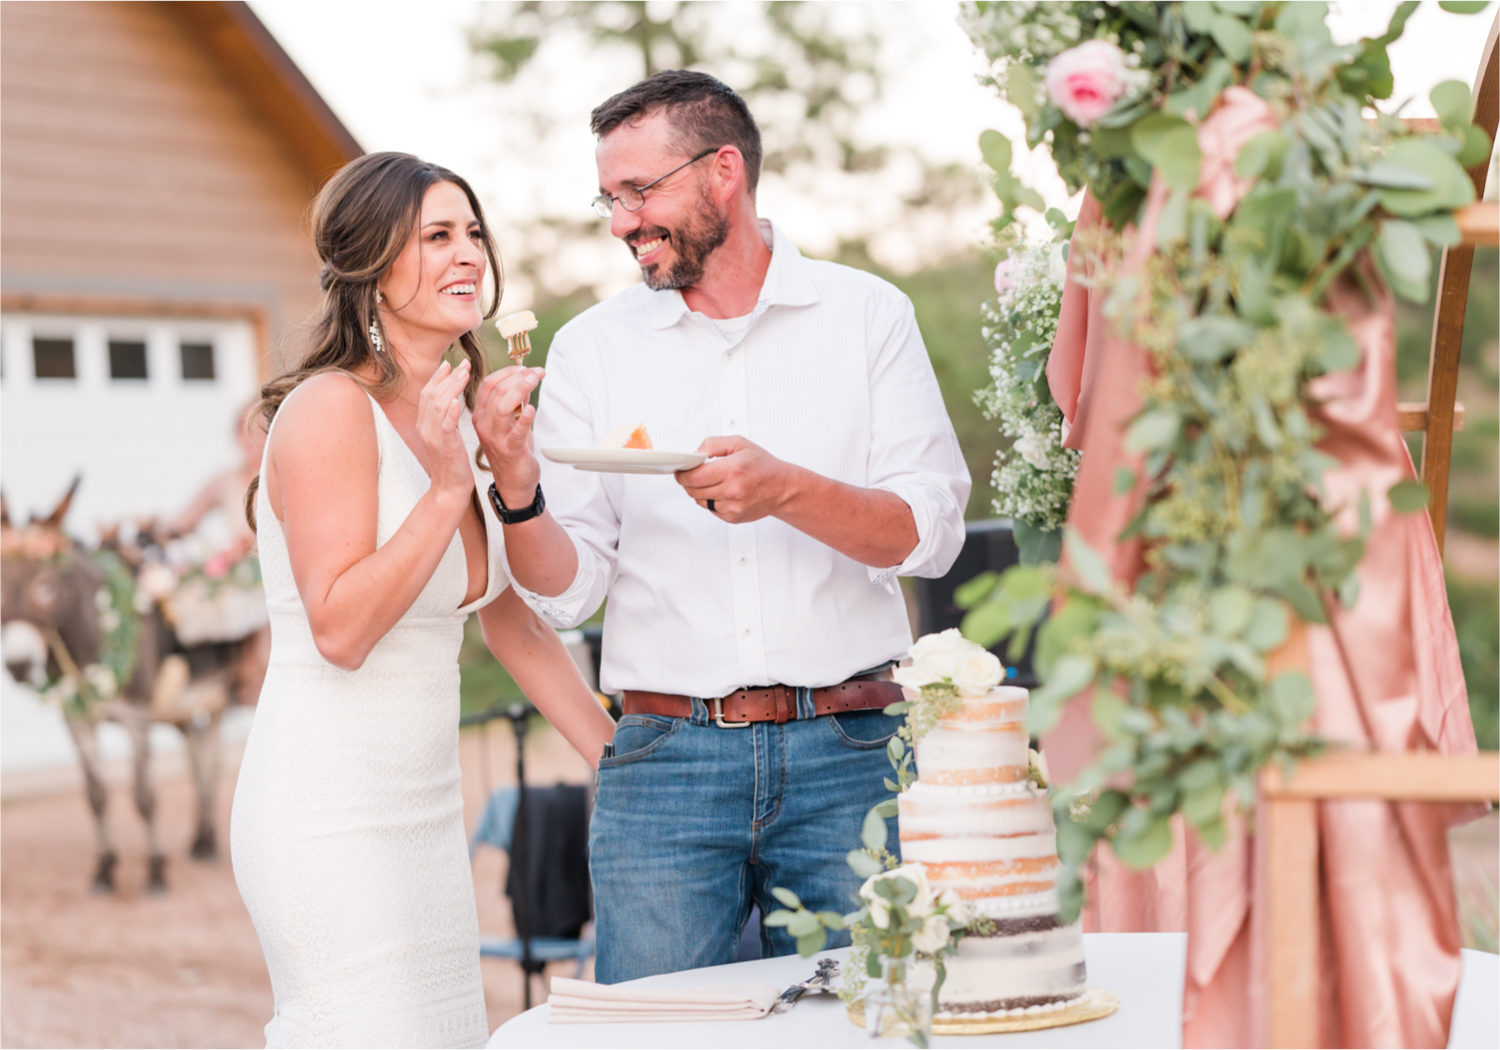 Autumn mountain wedding in Florence Colorado | Britni Girard Photography | Colorado Wedding Photo and Video Team | Mountainside Cabin for intimate wedding with rustic farm-tables and romantic details | 3 tiered cake by Sugar Plum Cake Shoppe White, Dusty Rose and Sage